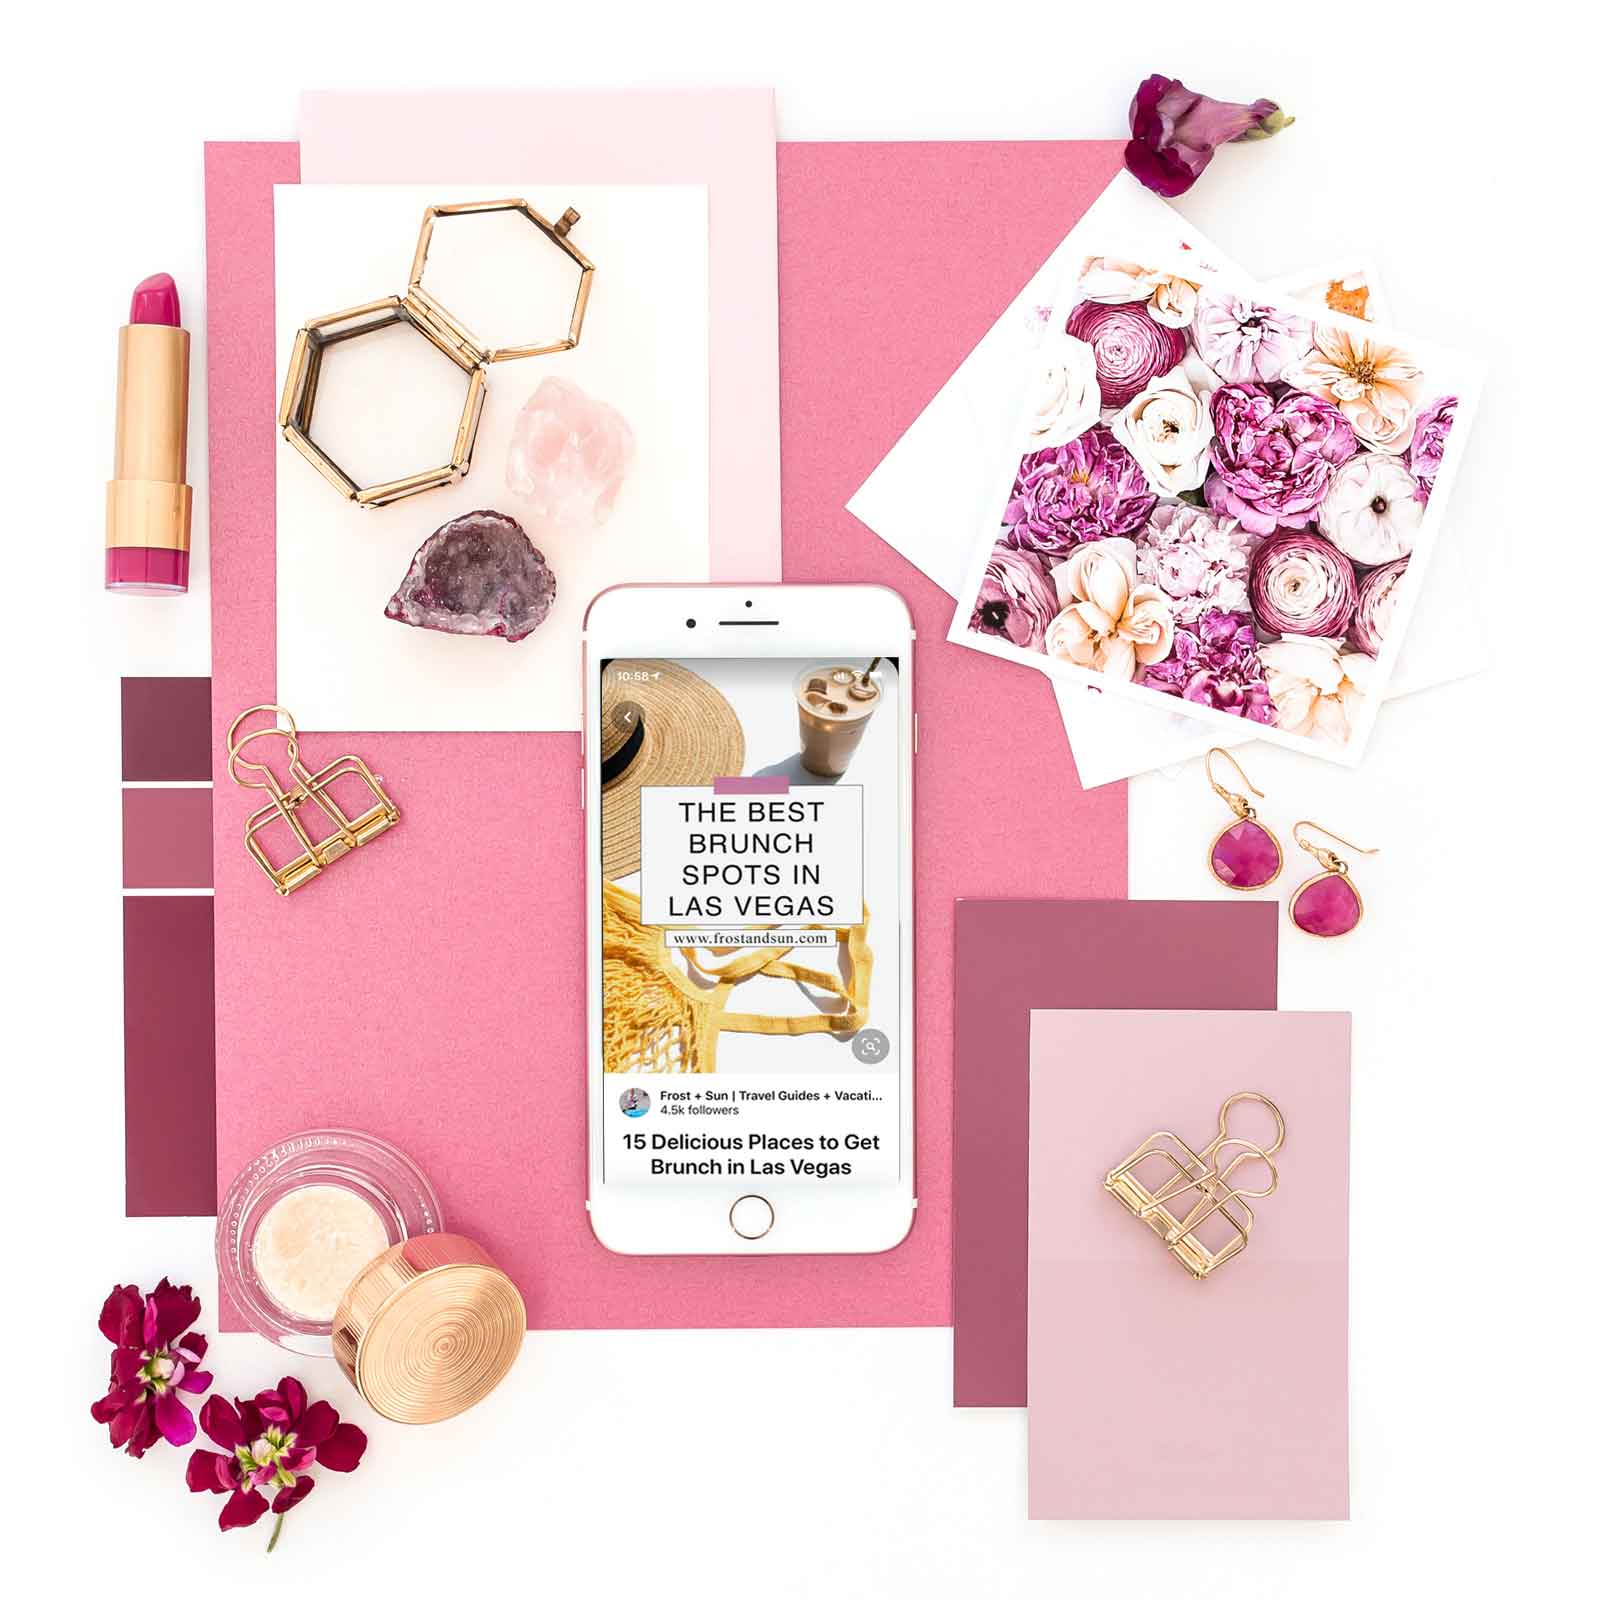 Flat lay of pink and gold objects, such as lipstick, papers, flowers, and makeup, artfully arranged. In the middle is a white iPhone open to a pin on Pinterest with extra data like profile photo, profile name, and blog post title.